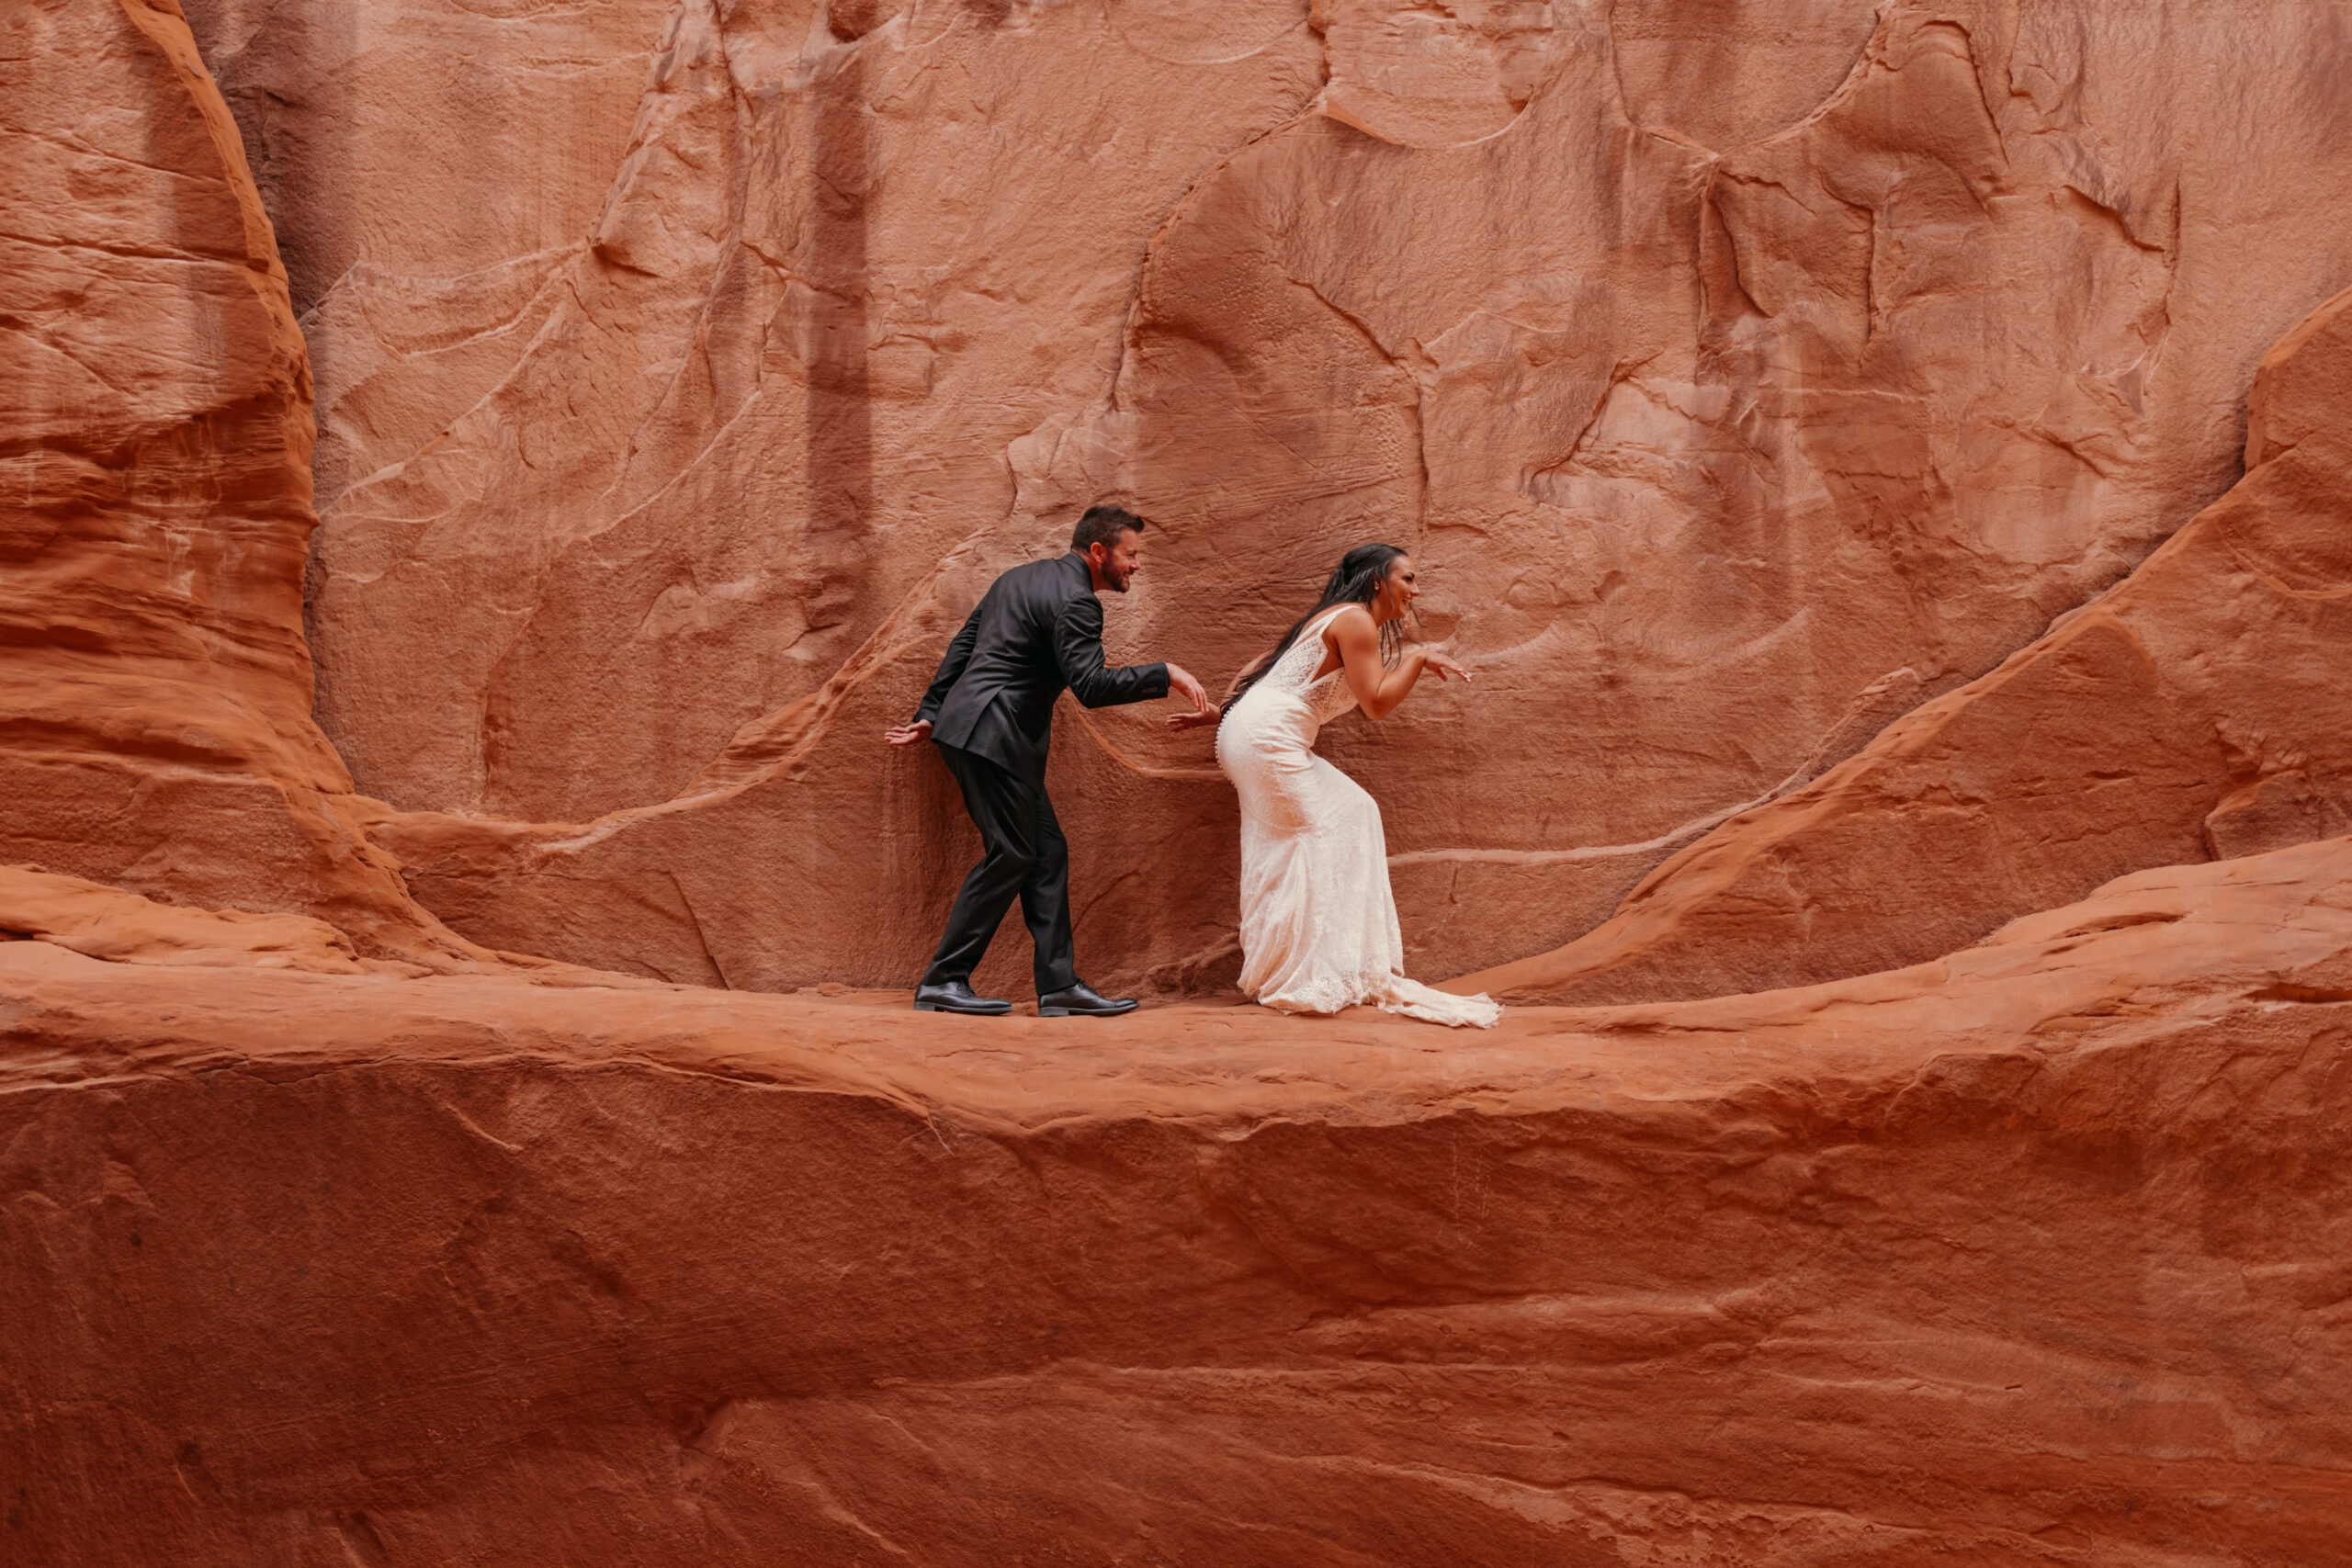 A couple pretends to be dinosaurs for a funny photo at Sand Dune Arch.